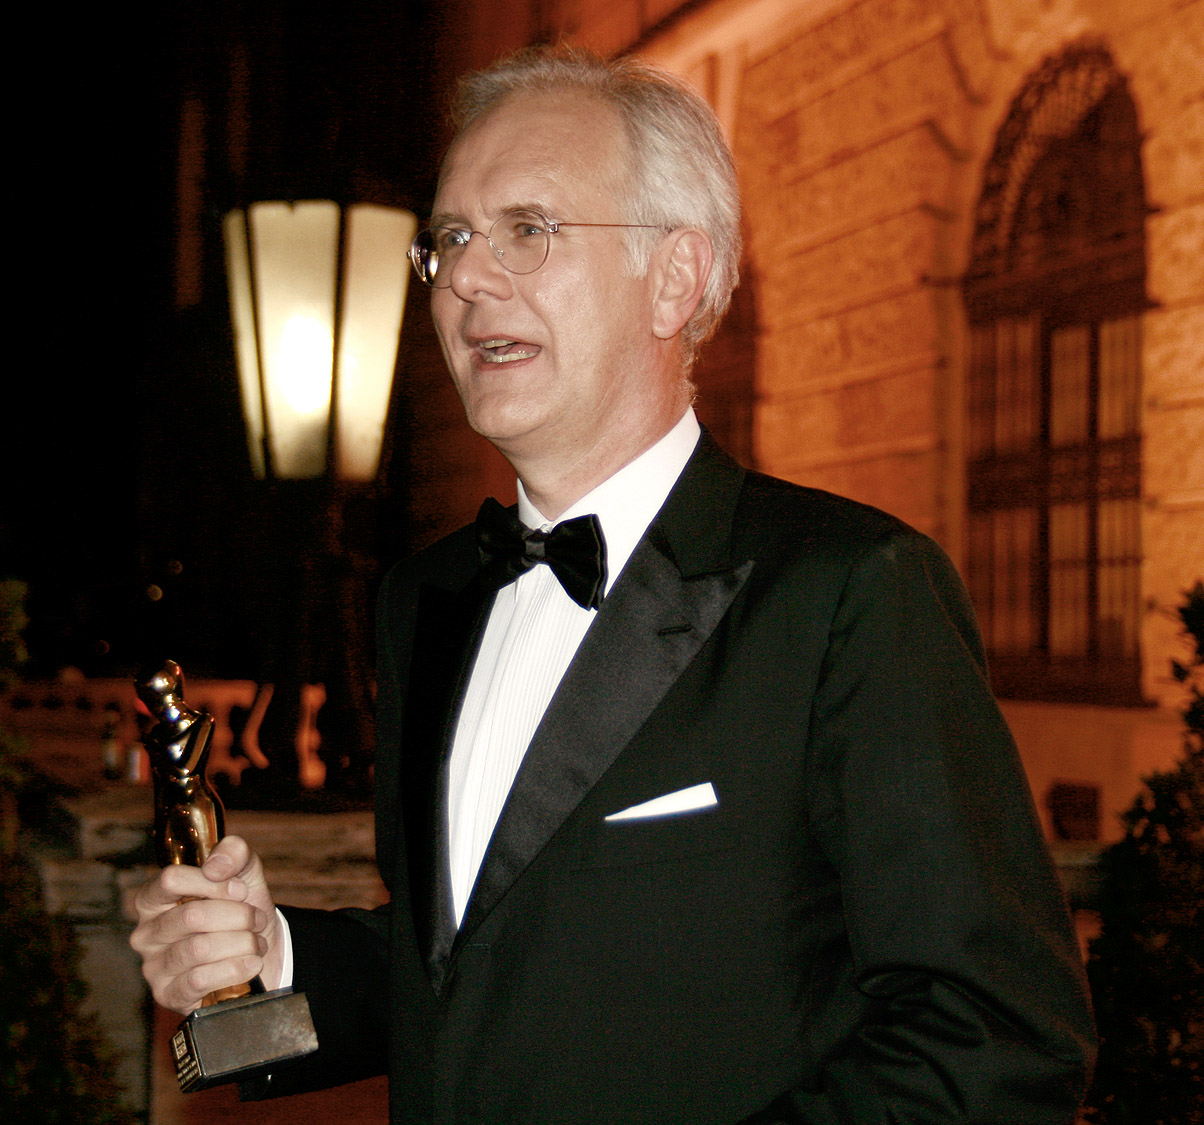 Harald Schmidt at the ROMY 2011 tv and film awards in Vienna